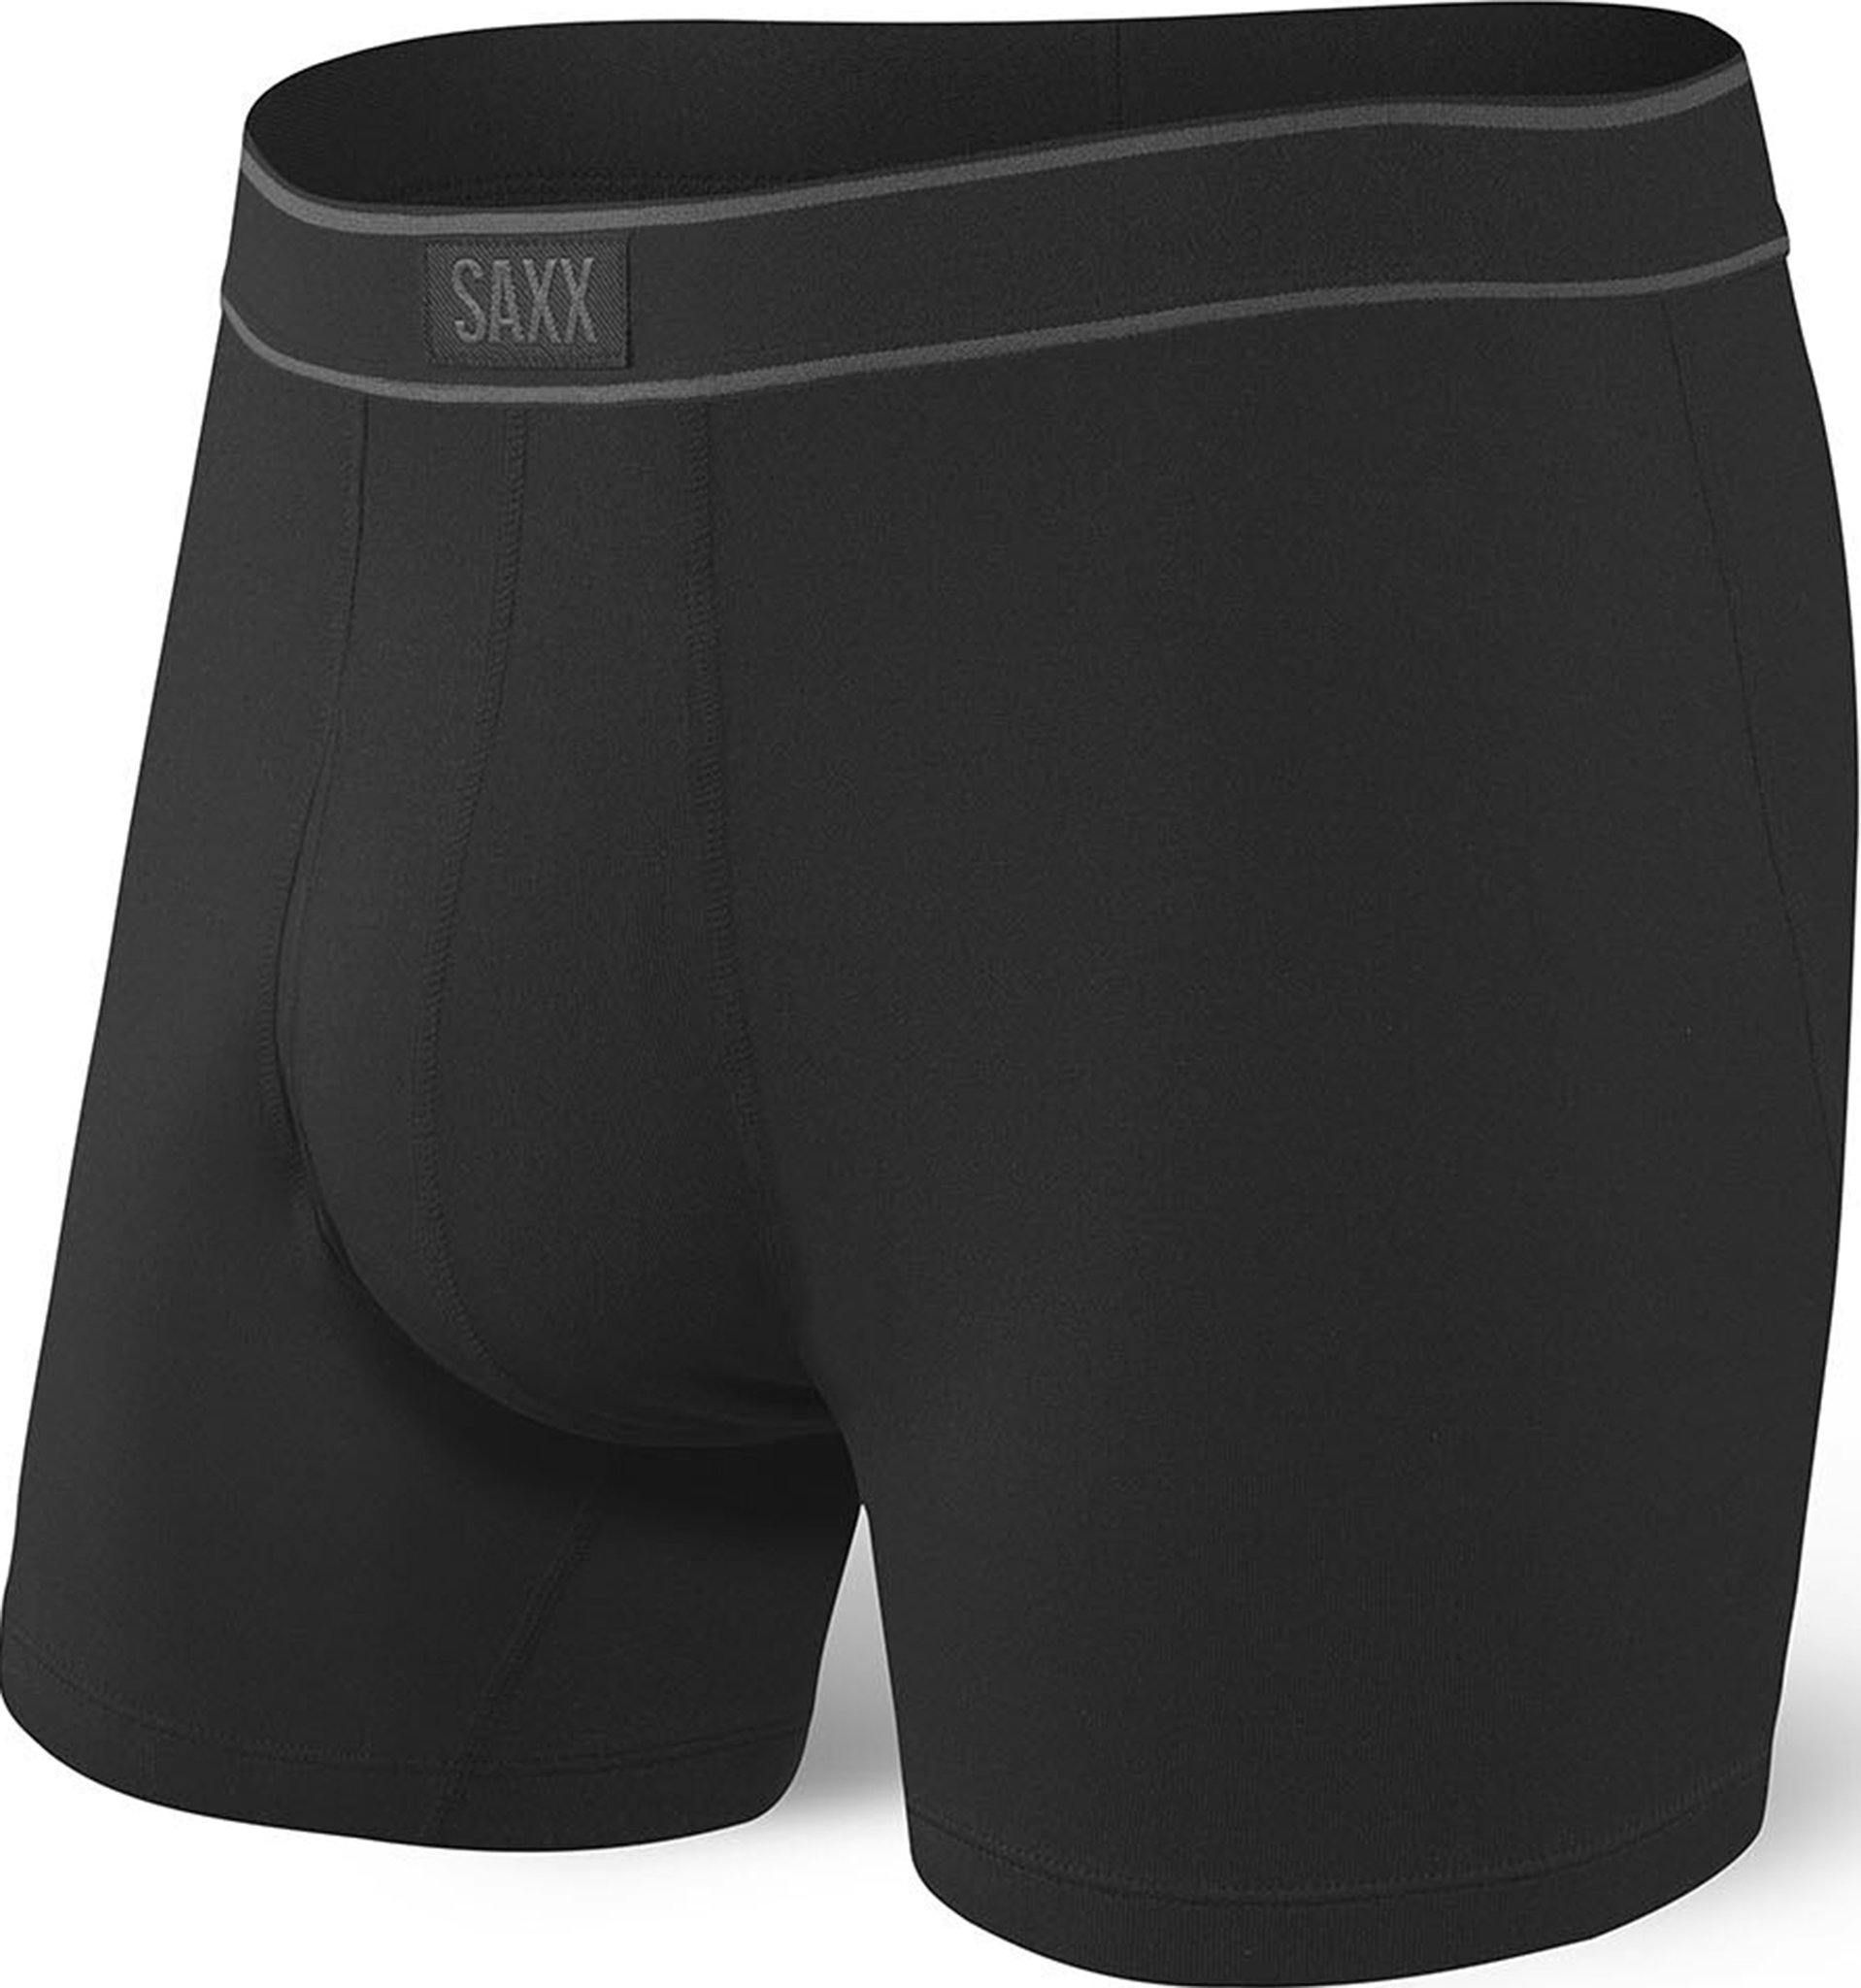 Product image for Daytripper Boxer Brief Fly - Men's